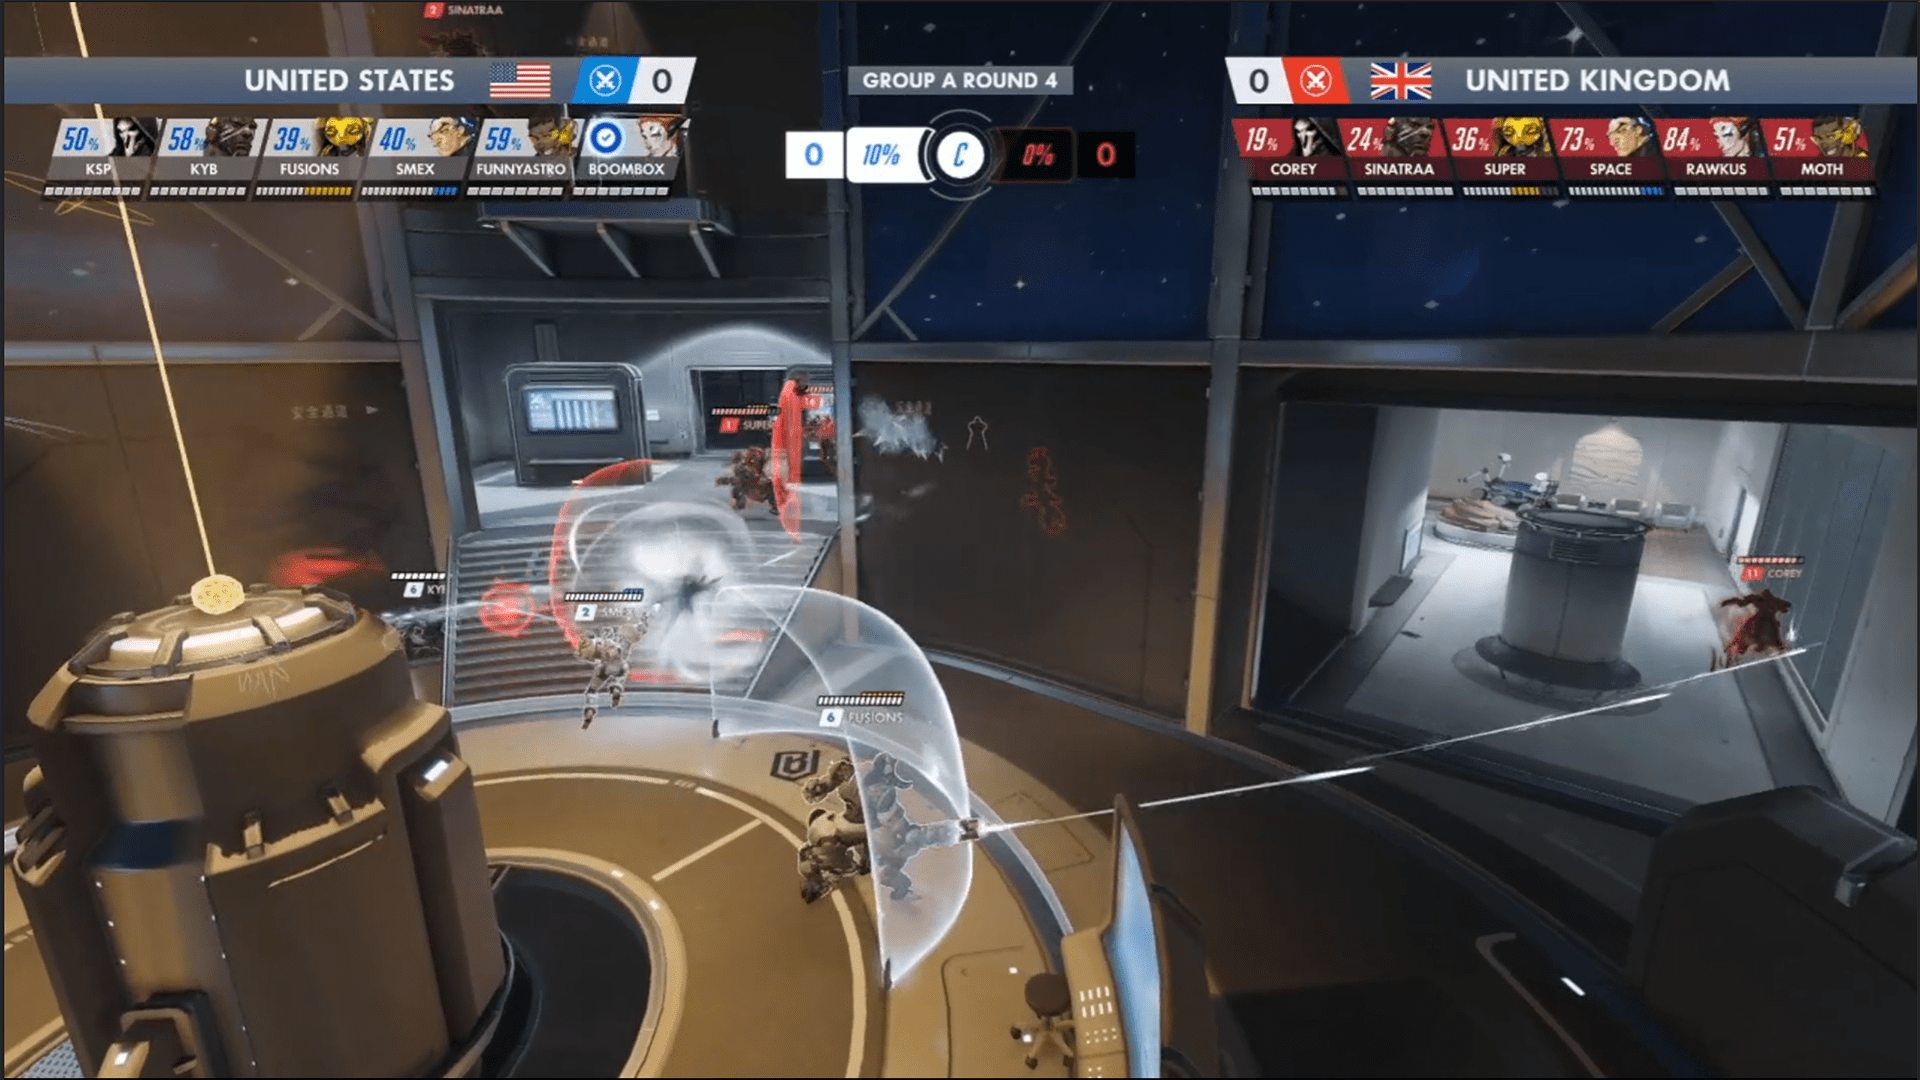 The Overwatch World Cup Is Well Underway; Highlights Decent Play Along With Many Problems